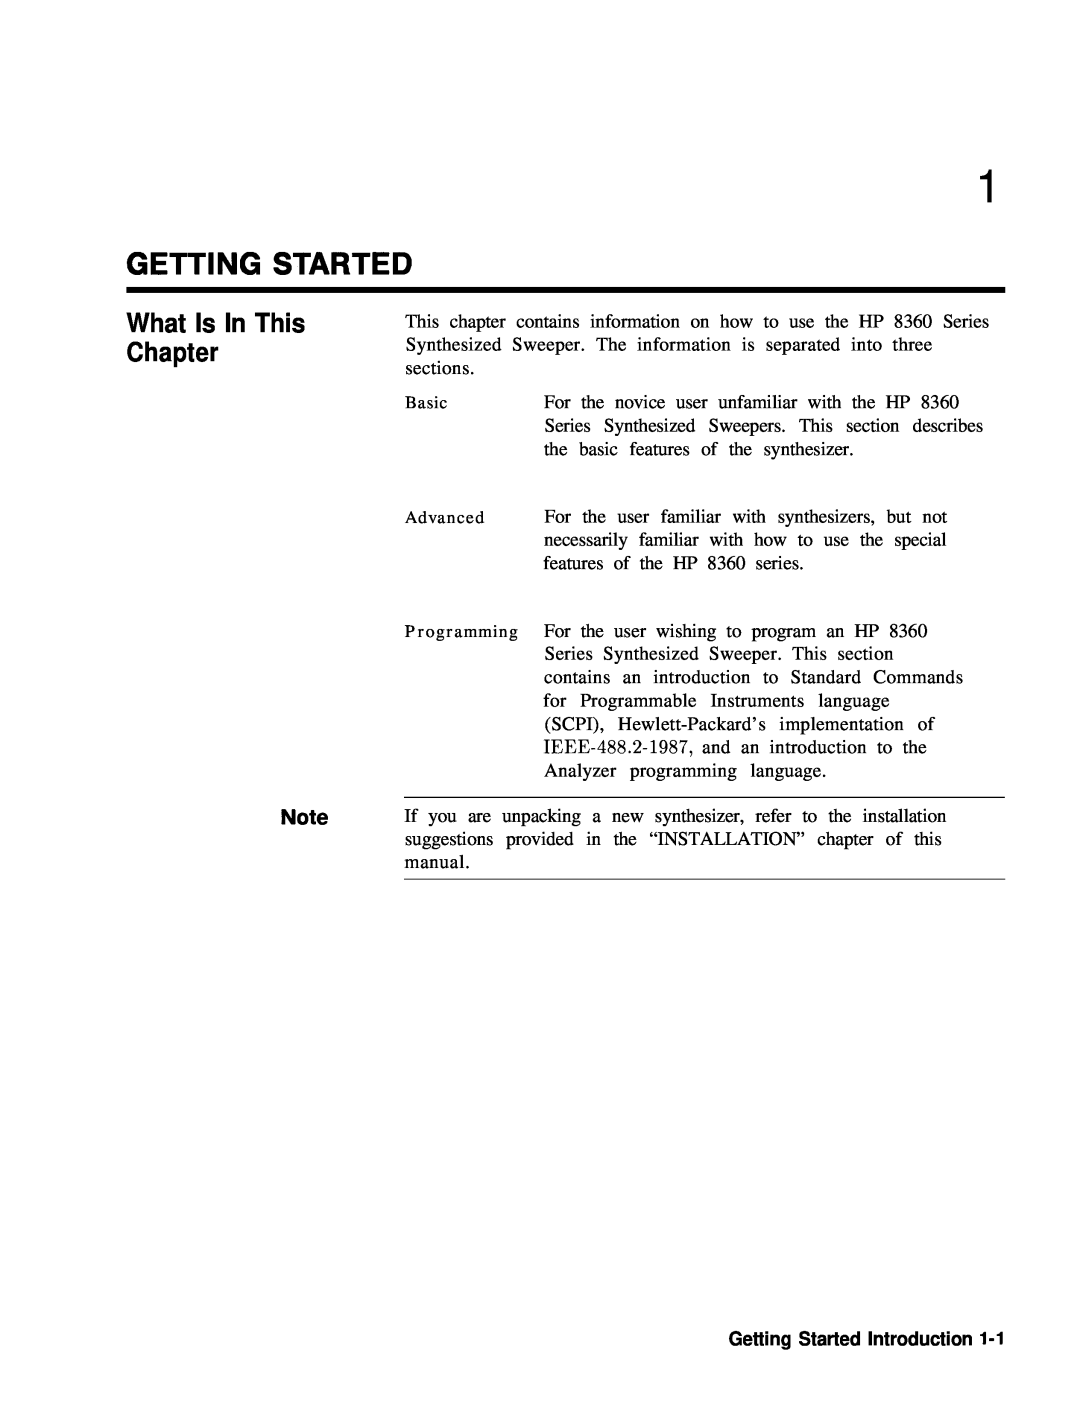 HP 24A, 83620A, 22A manual What Is In This Chapter, Getting Started Introduction l-1 